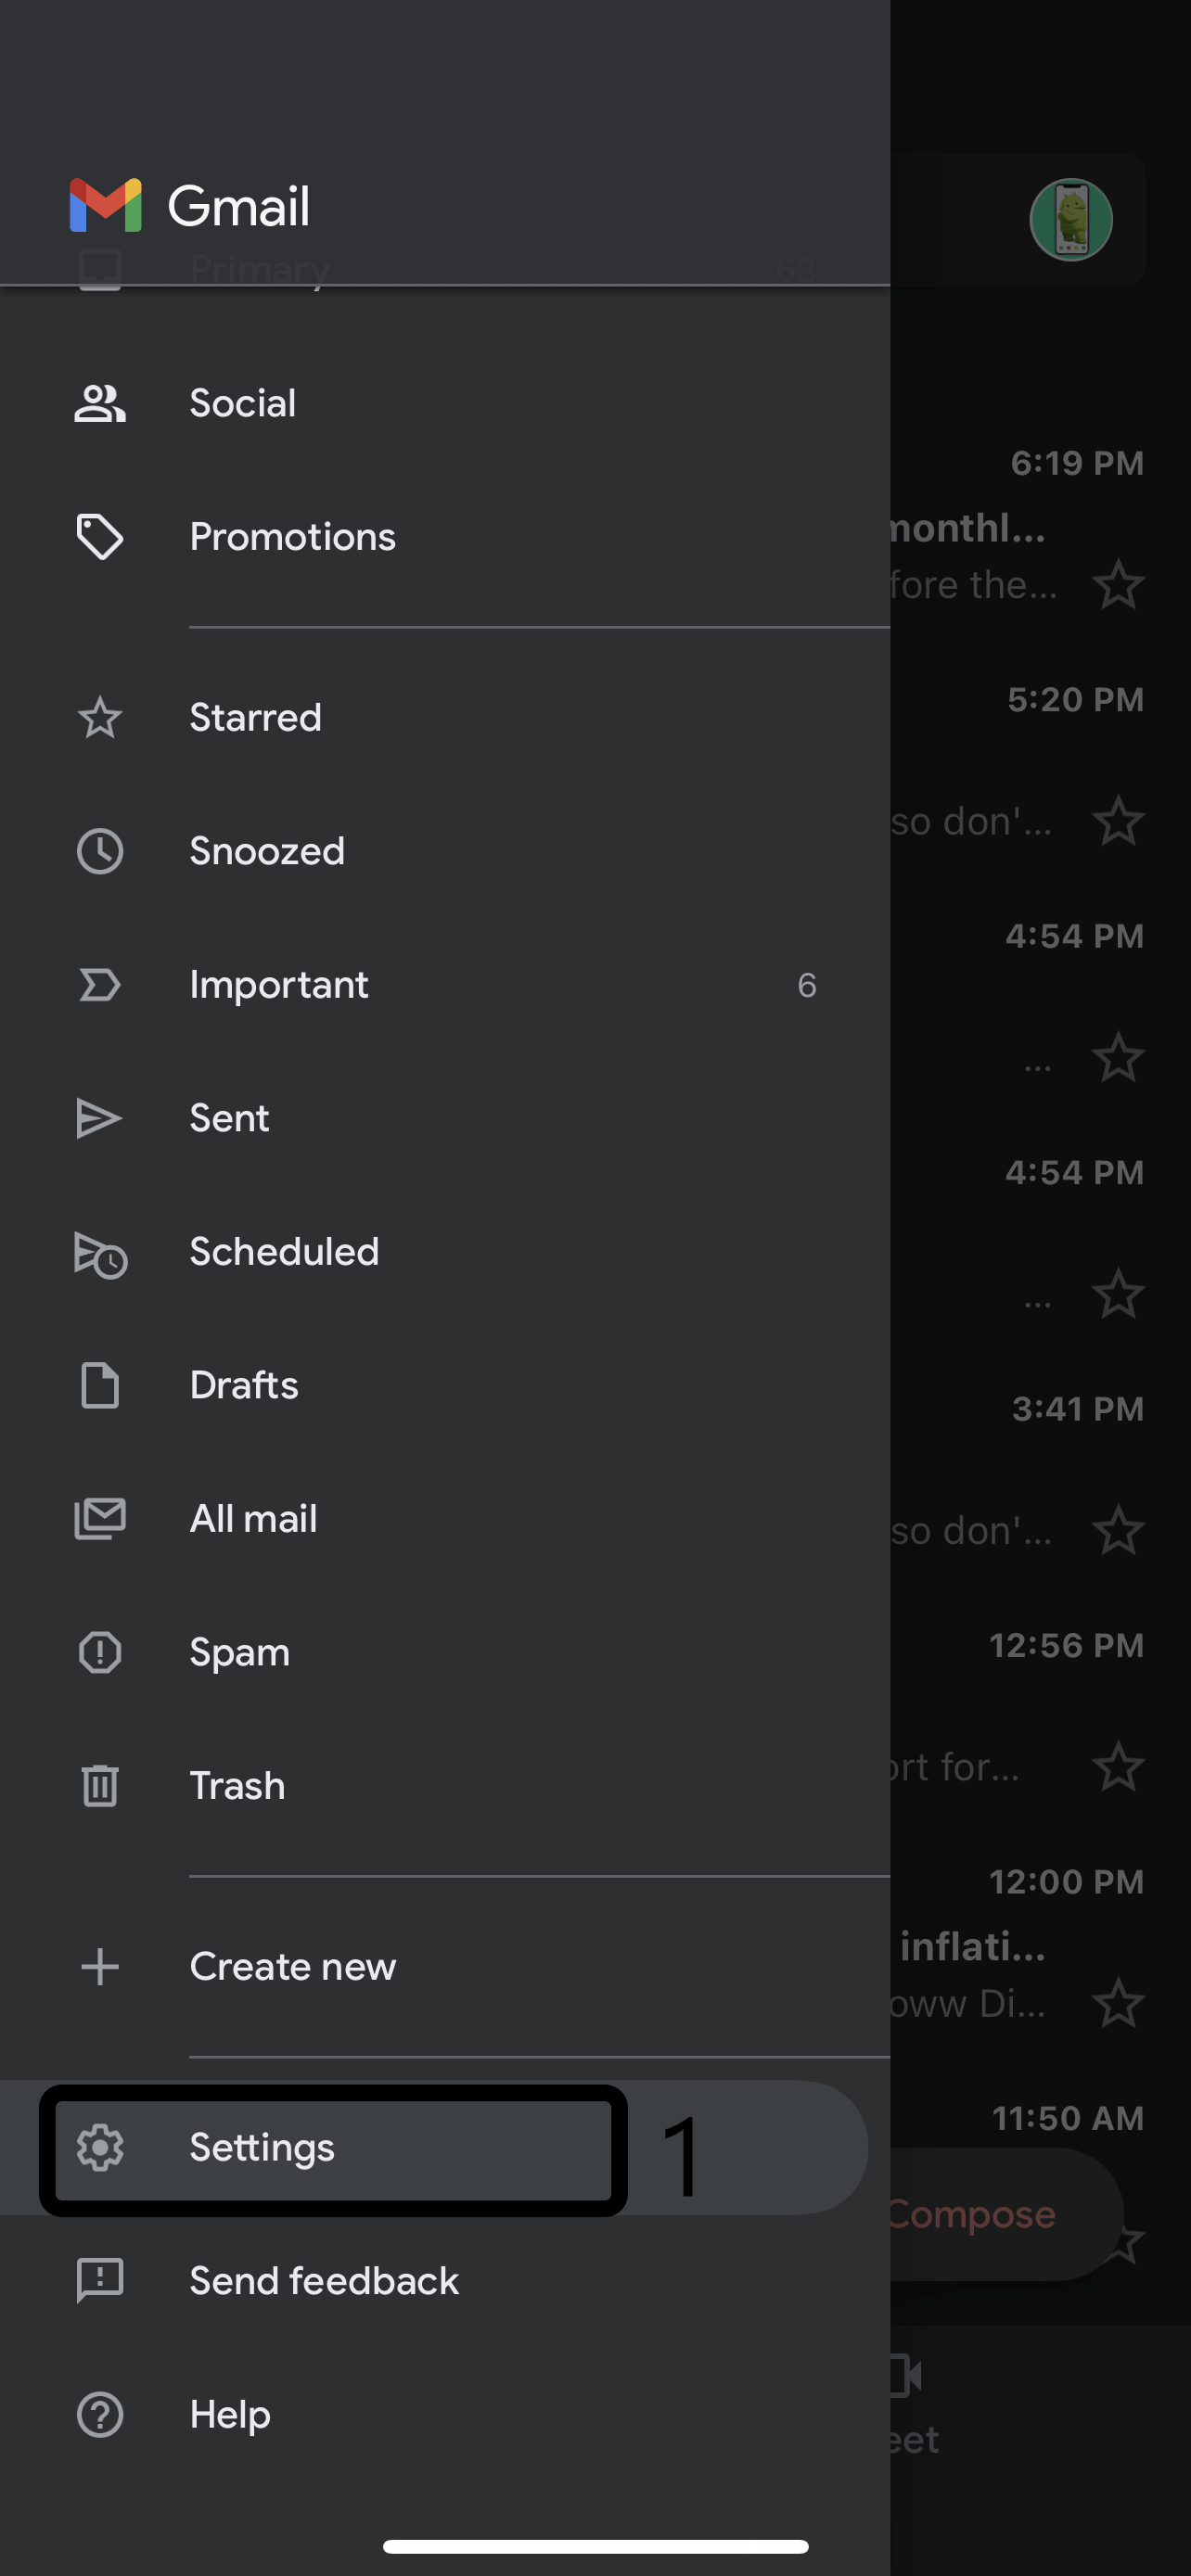 Open Gmail, and click on settings